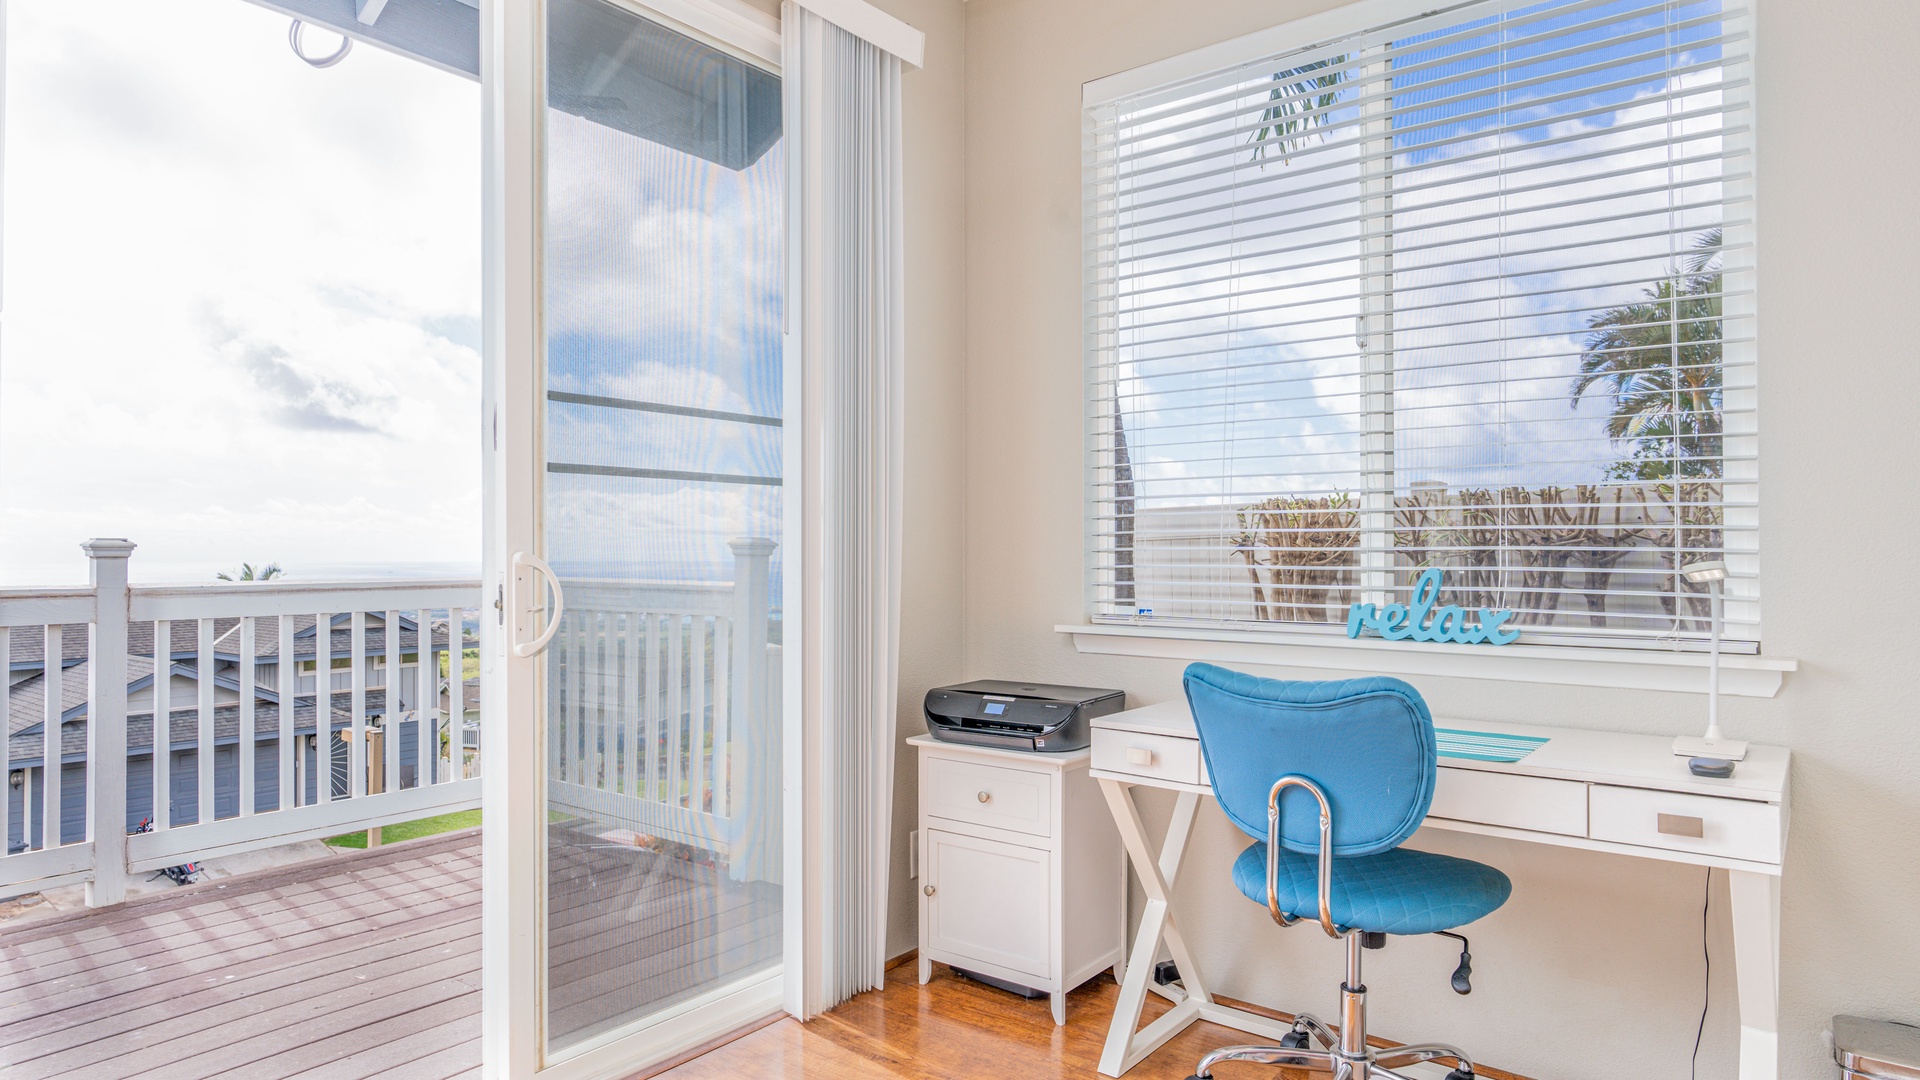 Kapolei Vacation Rentals, Makakilo Elele 48 - A dedicated workspace for you to stay productive while away, with a convenient direct access to private lanai.